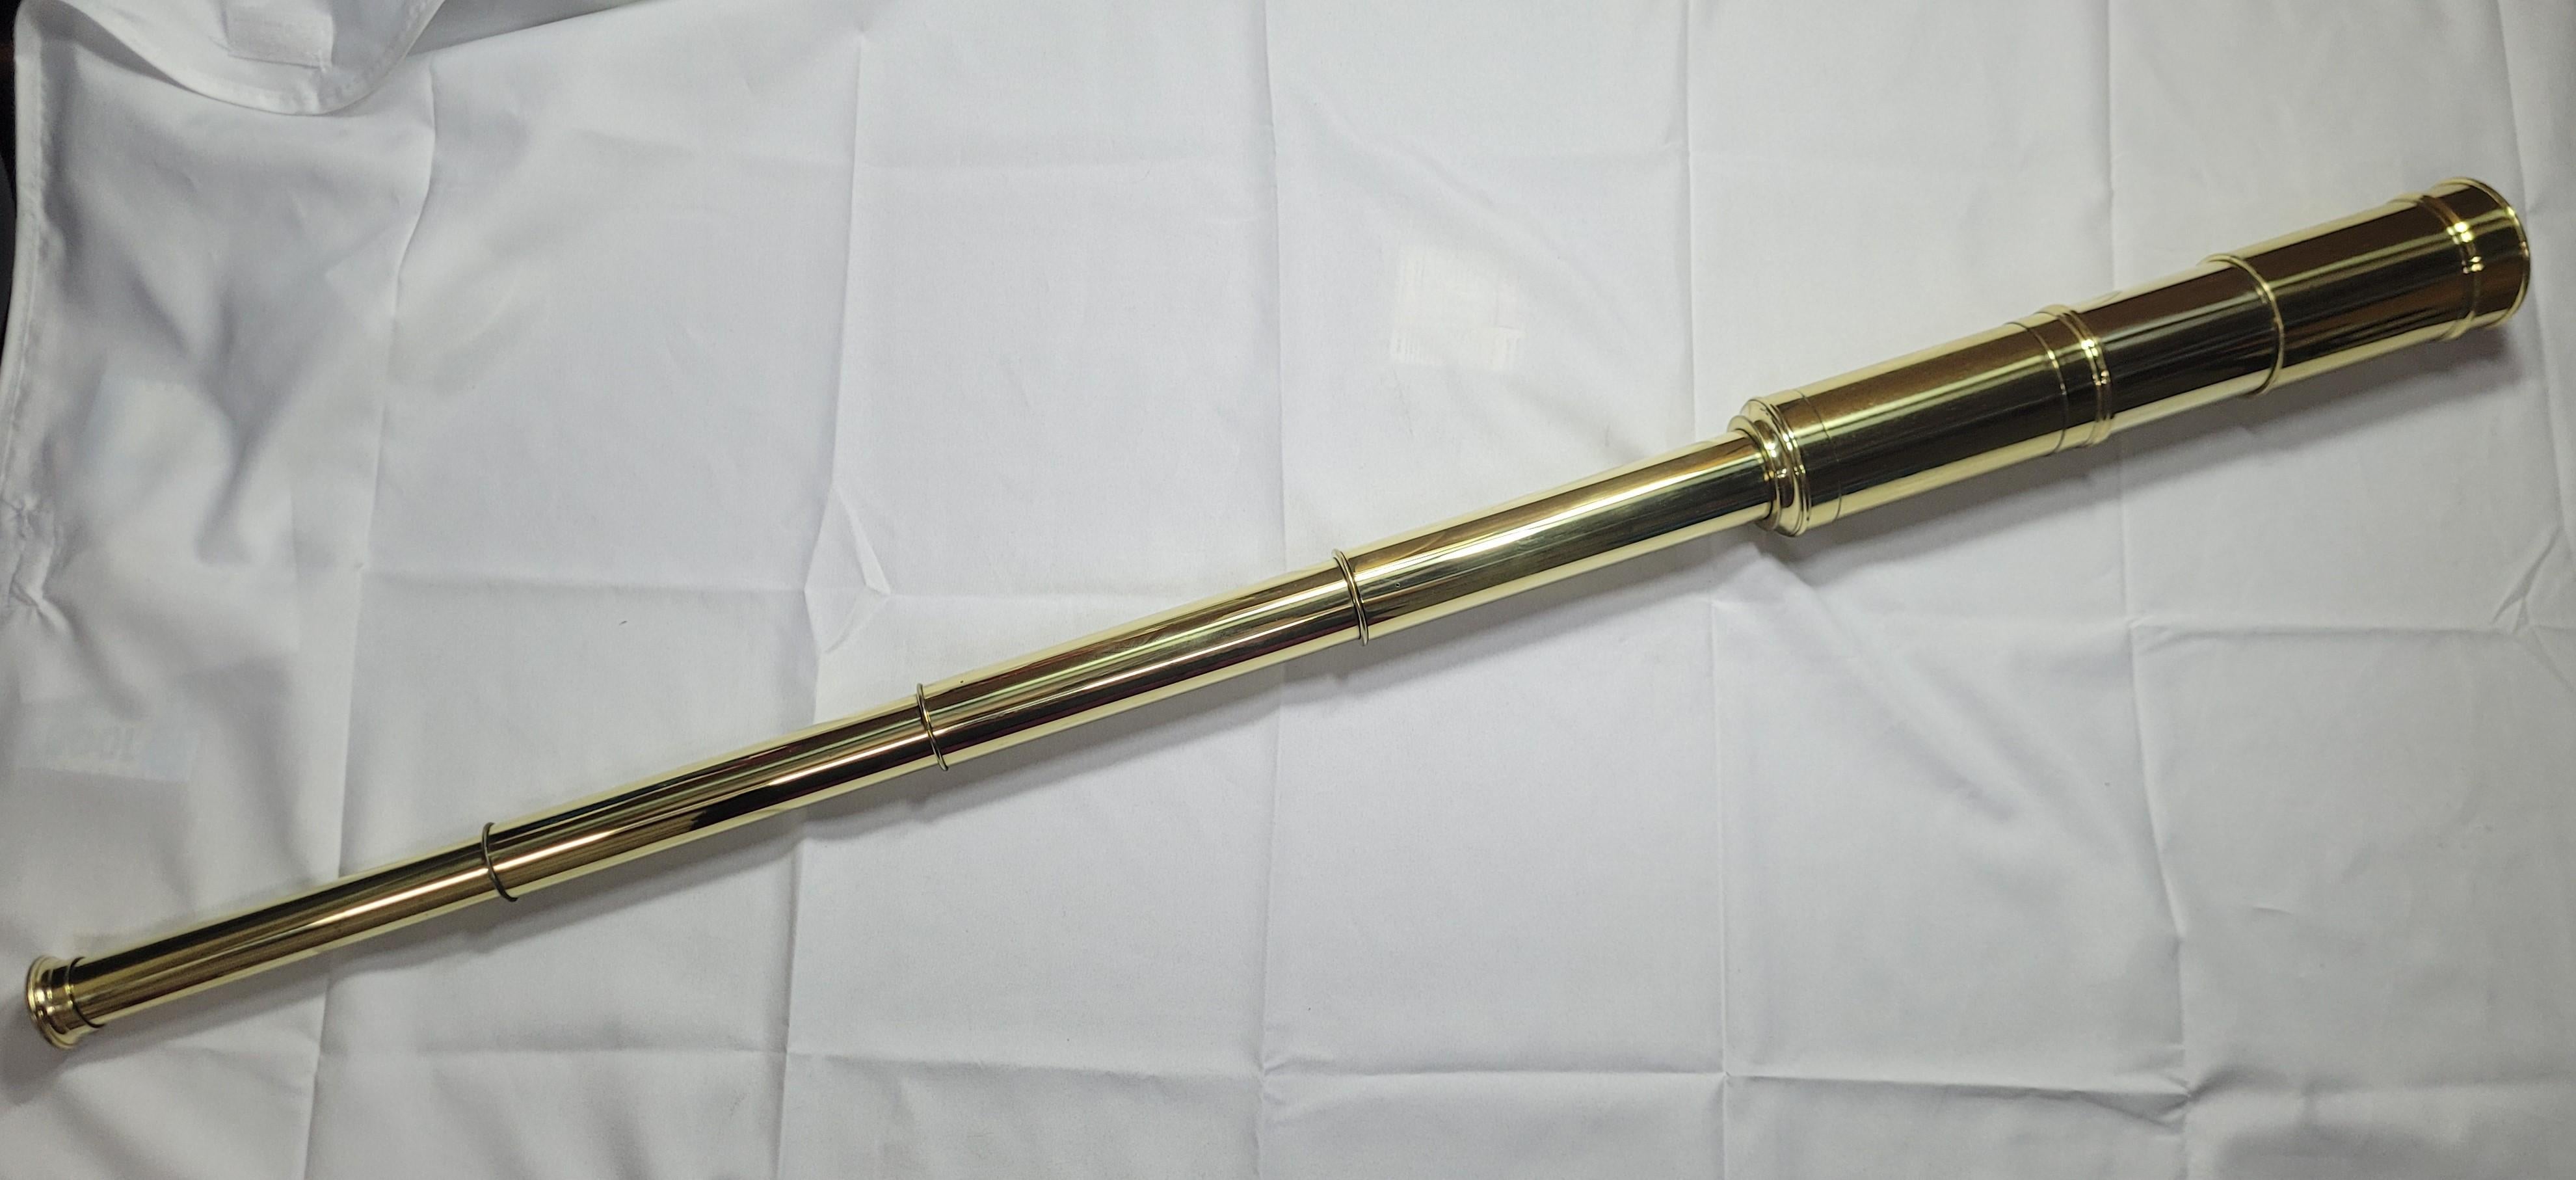 Antique mariners telescope of solid brass that has been polished and the main barrel, eyepiece and cap have been lacquered. The scope has a four draw barrel with eyepiece. Circa 1890. Very high quality marine instrument.

Weight: 1 lb.
Overall